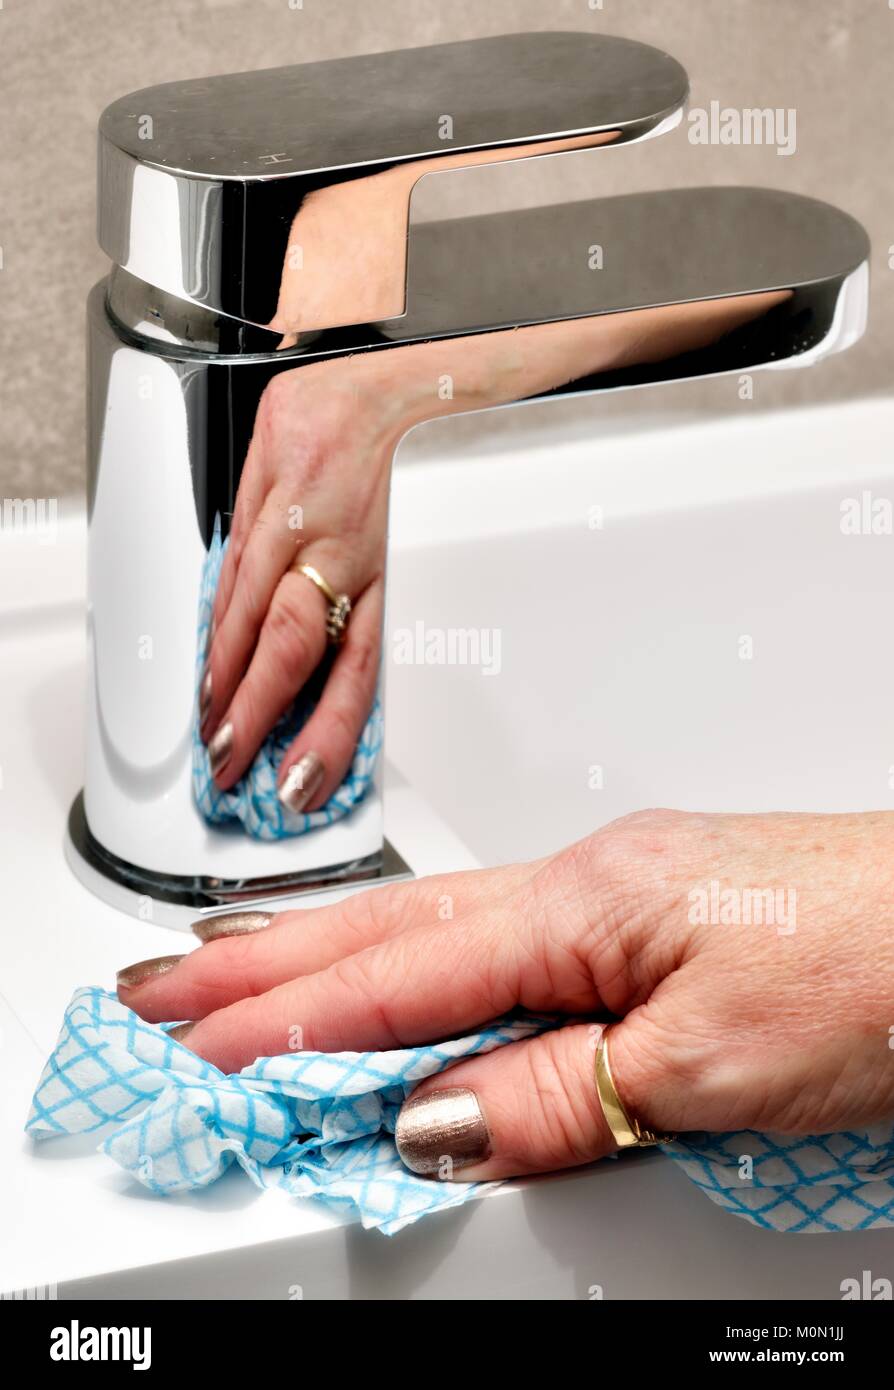 A female hand cleaning a bathroom tap and sink Stock Photo